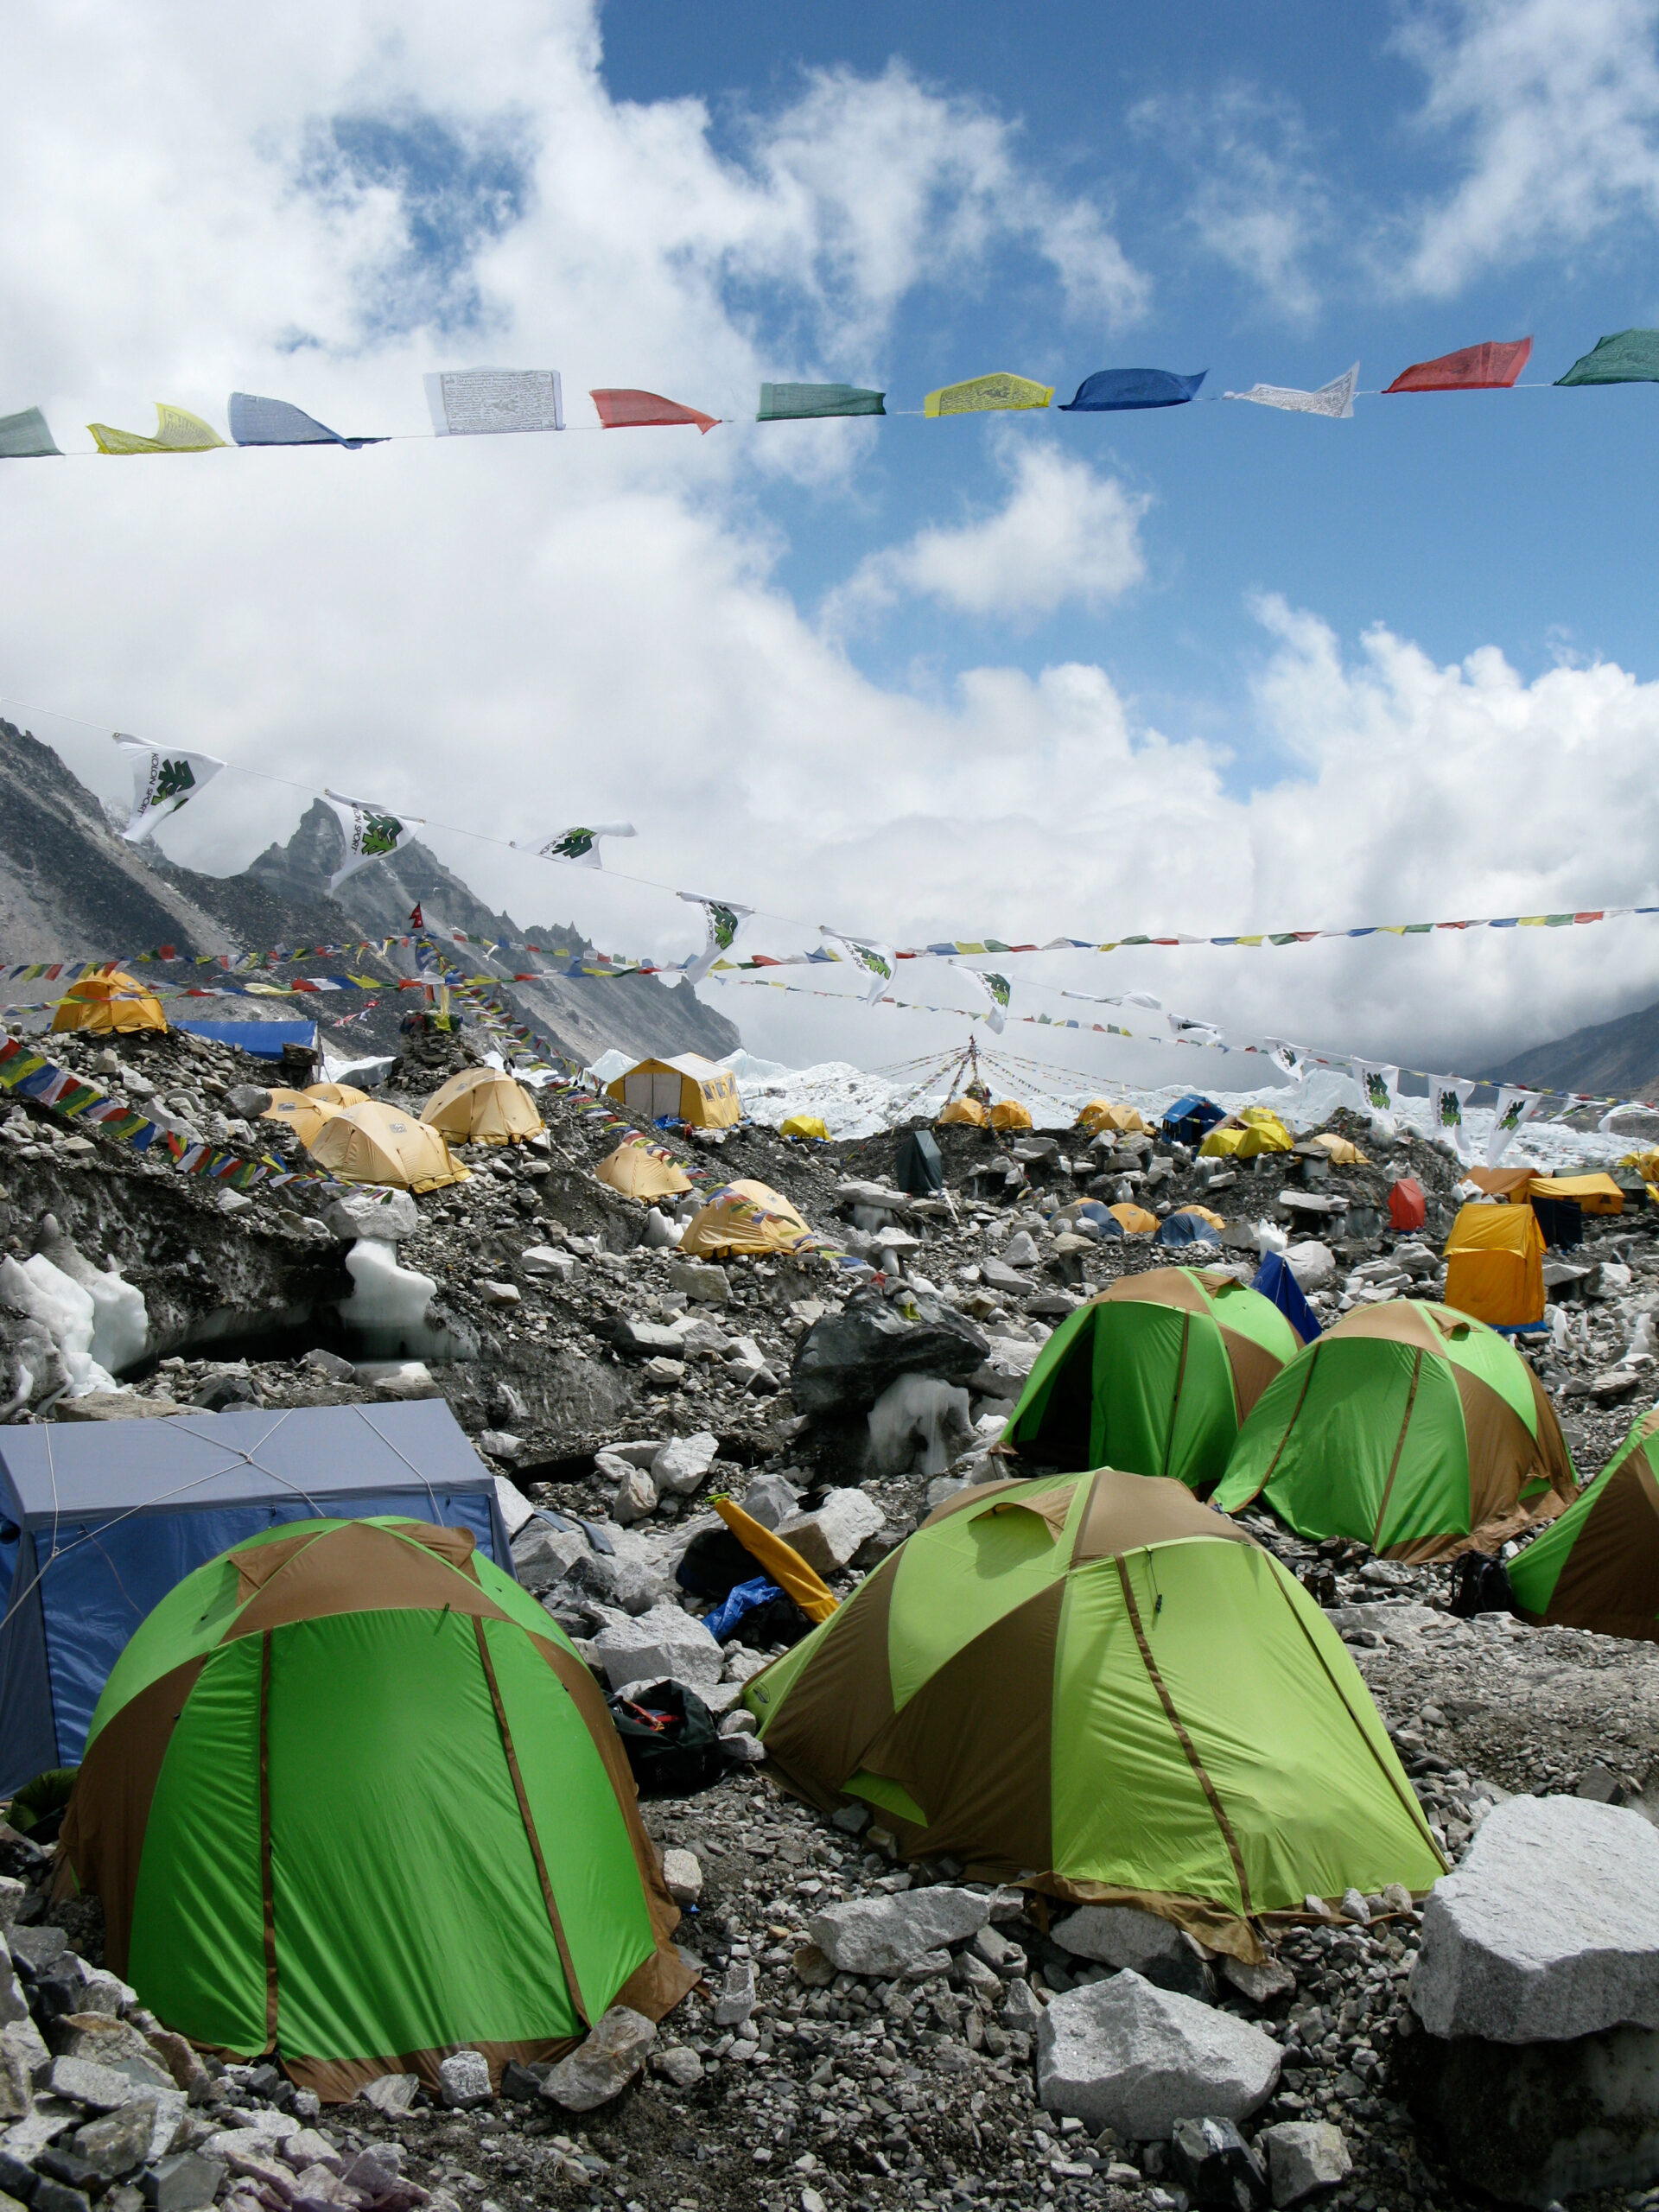 The Crowded Paths of Mount Everest Base Camp, Nepal